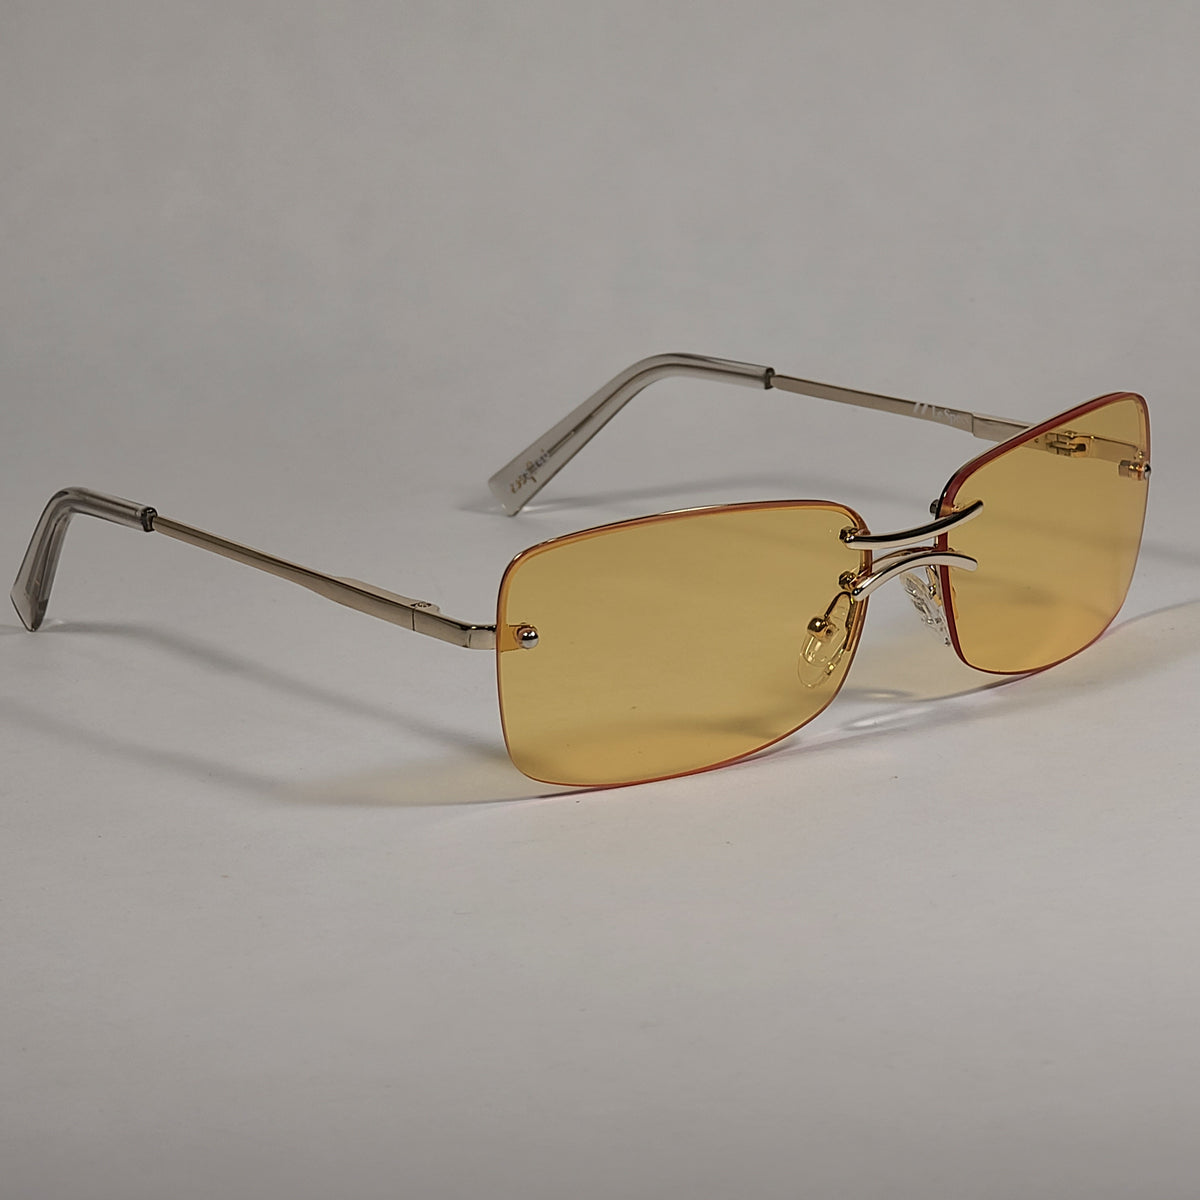 Le Specs That's Hot Rimless Rectangle Sunglasses Gold Tone Metal Frame